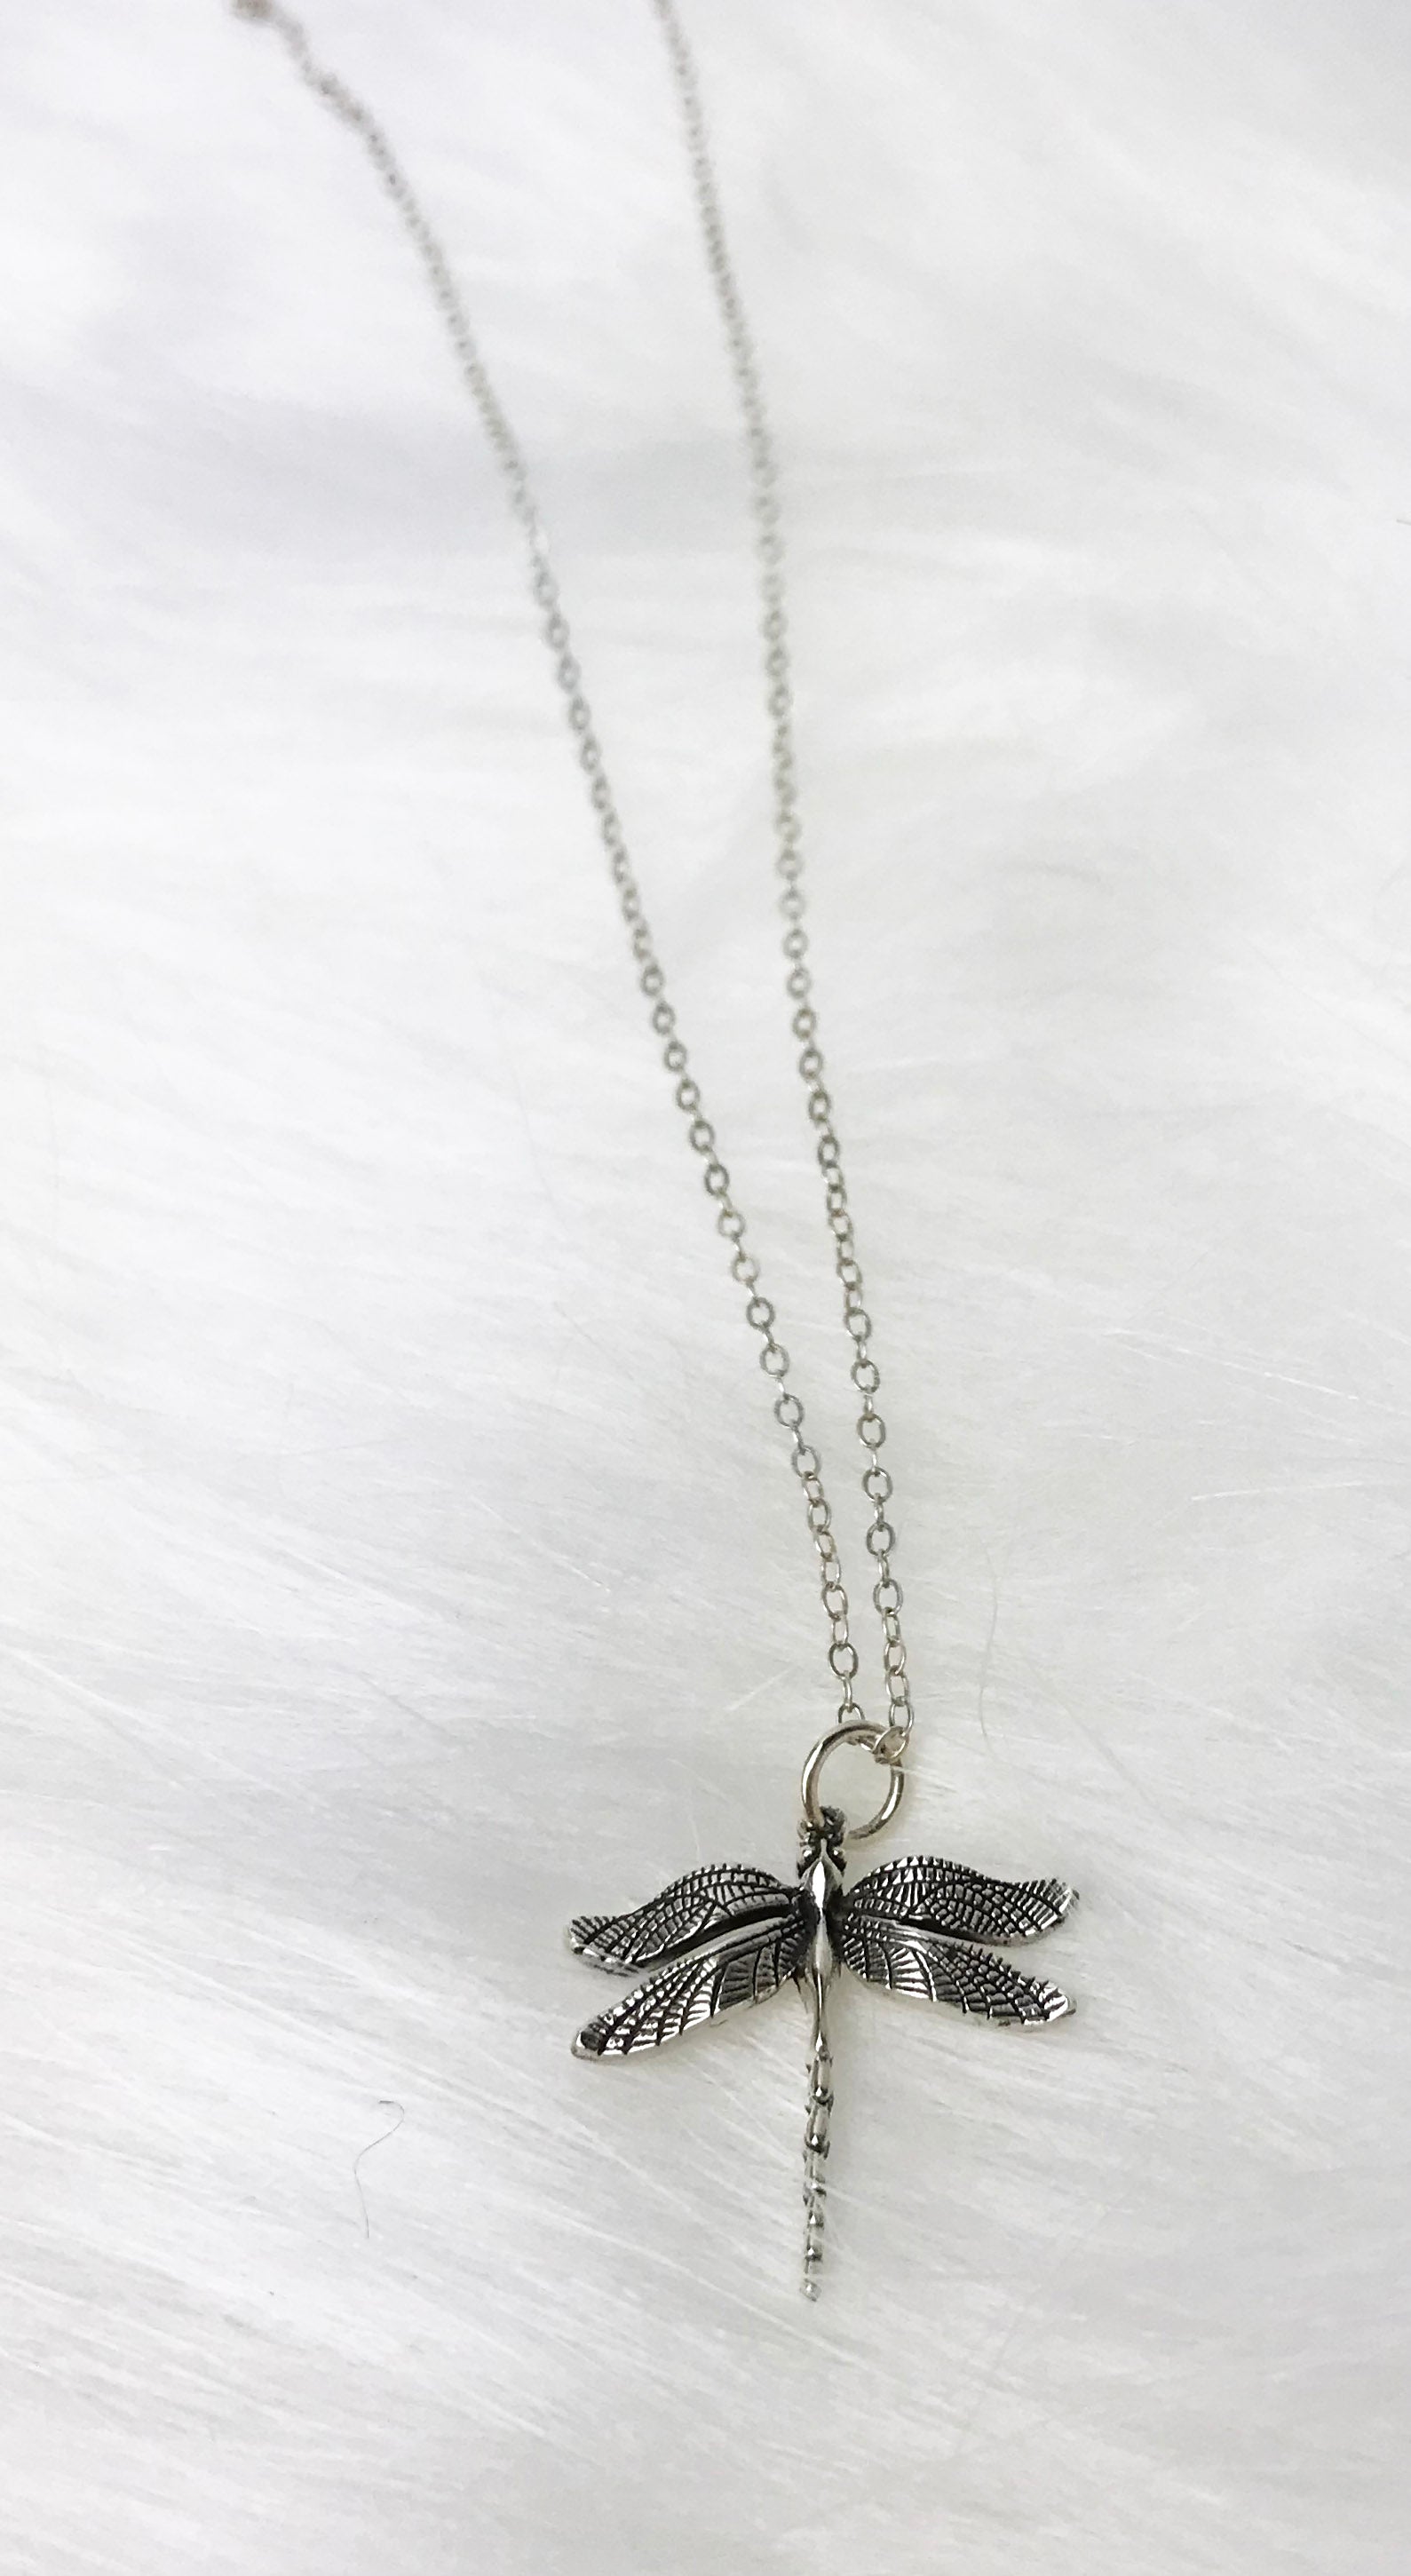 KINGWHYTE Dragonfly Necklace S925 Sterling Silver India | Ubuy